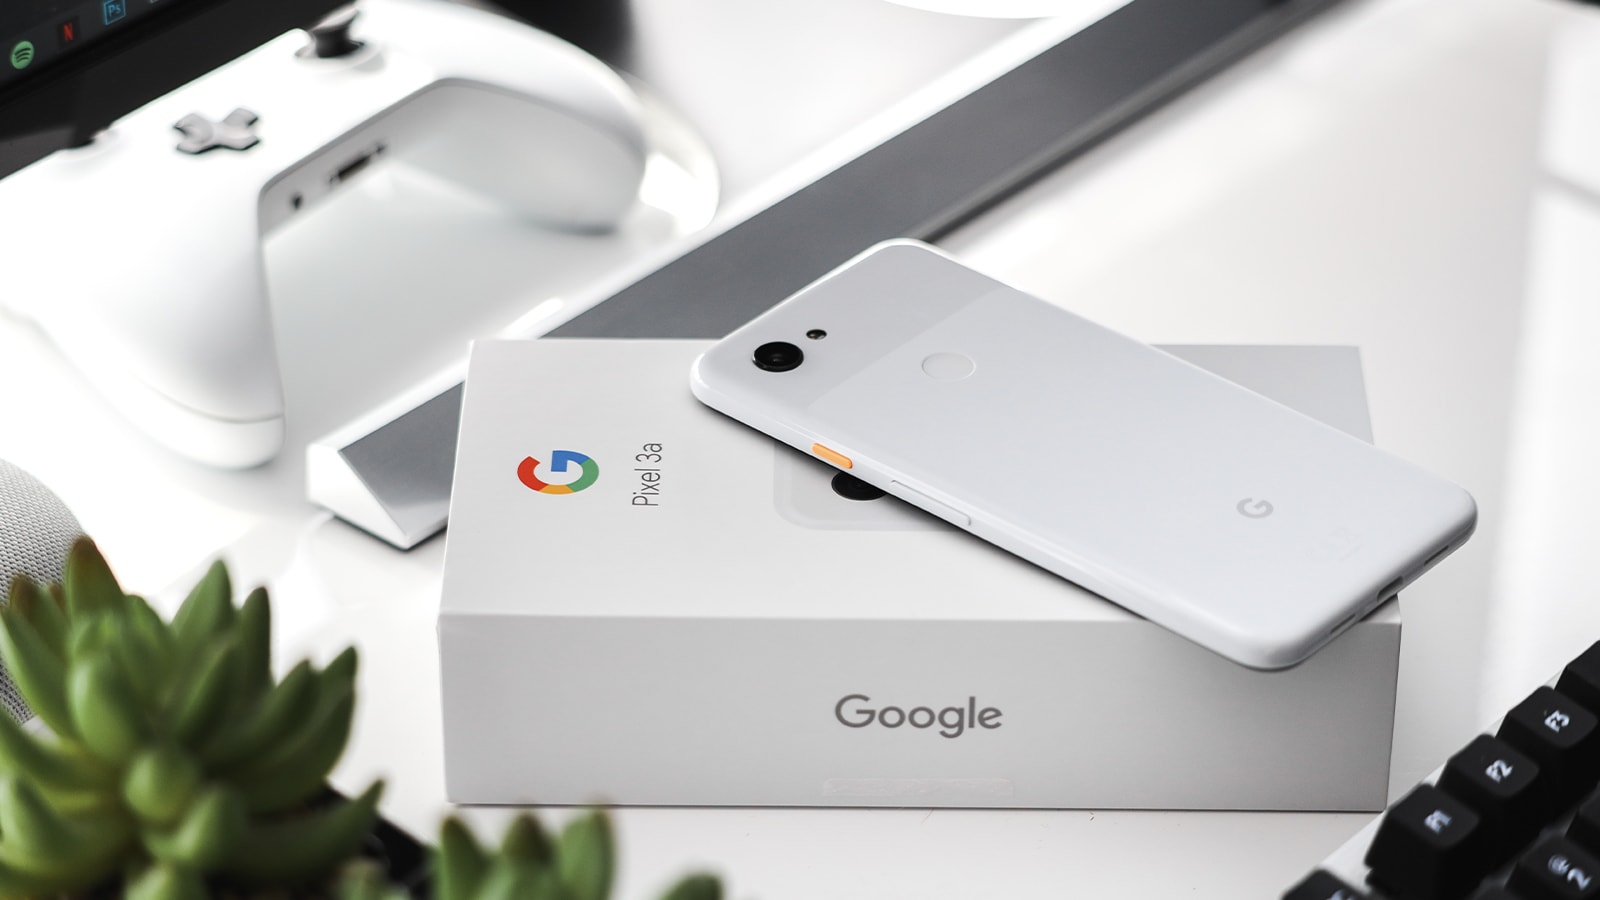 Entire 2020 Google’s Pixel Phone Lineup Has Reportedly Leaked